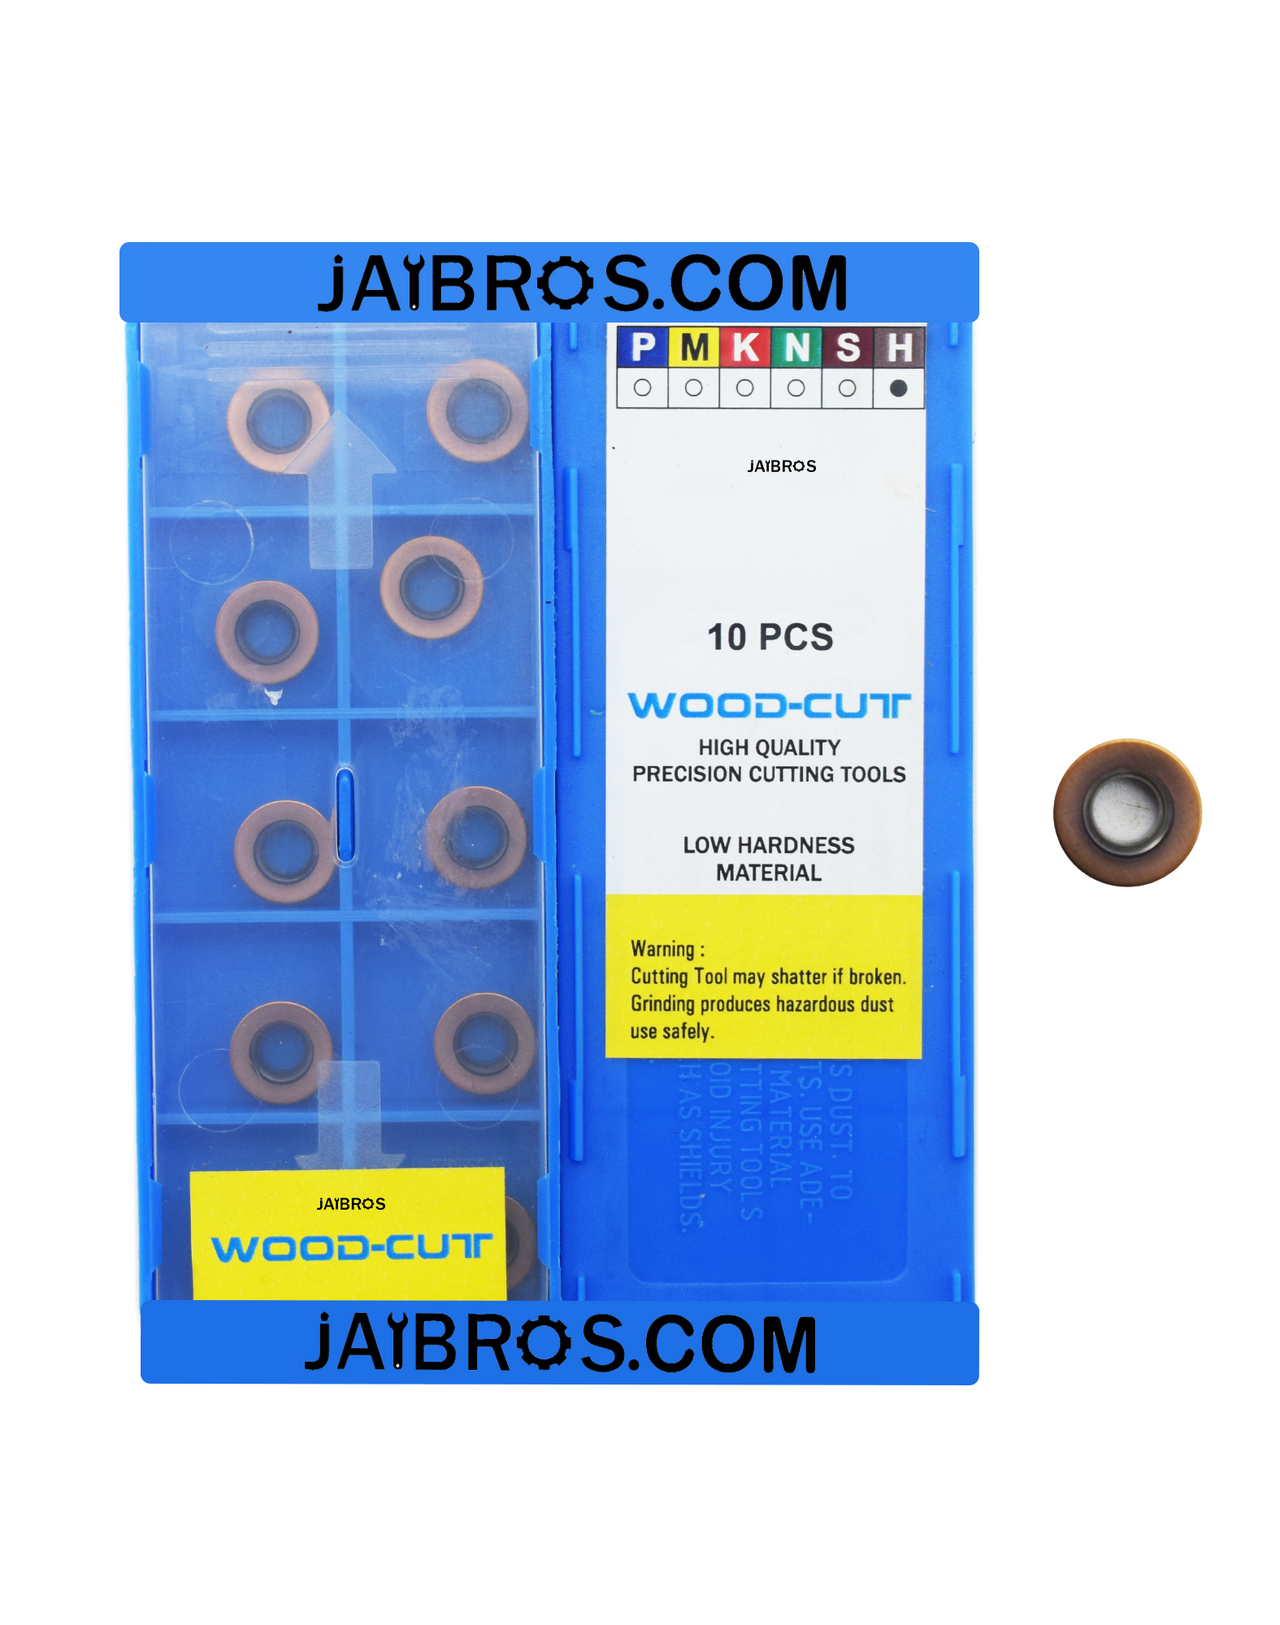 RPMW1003 insert for Wood cutting and Low hardness material pack of 10